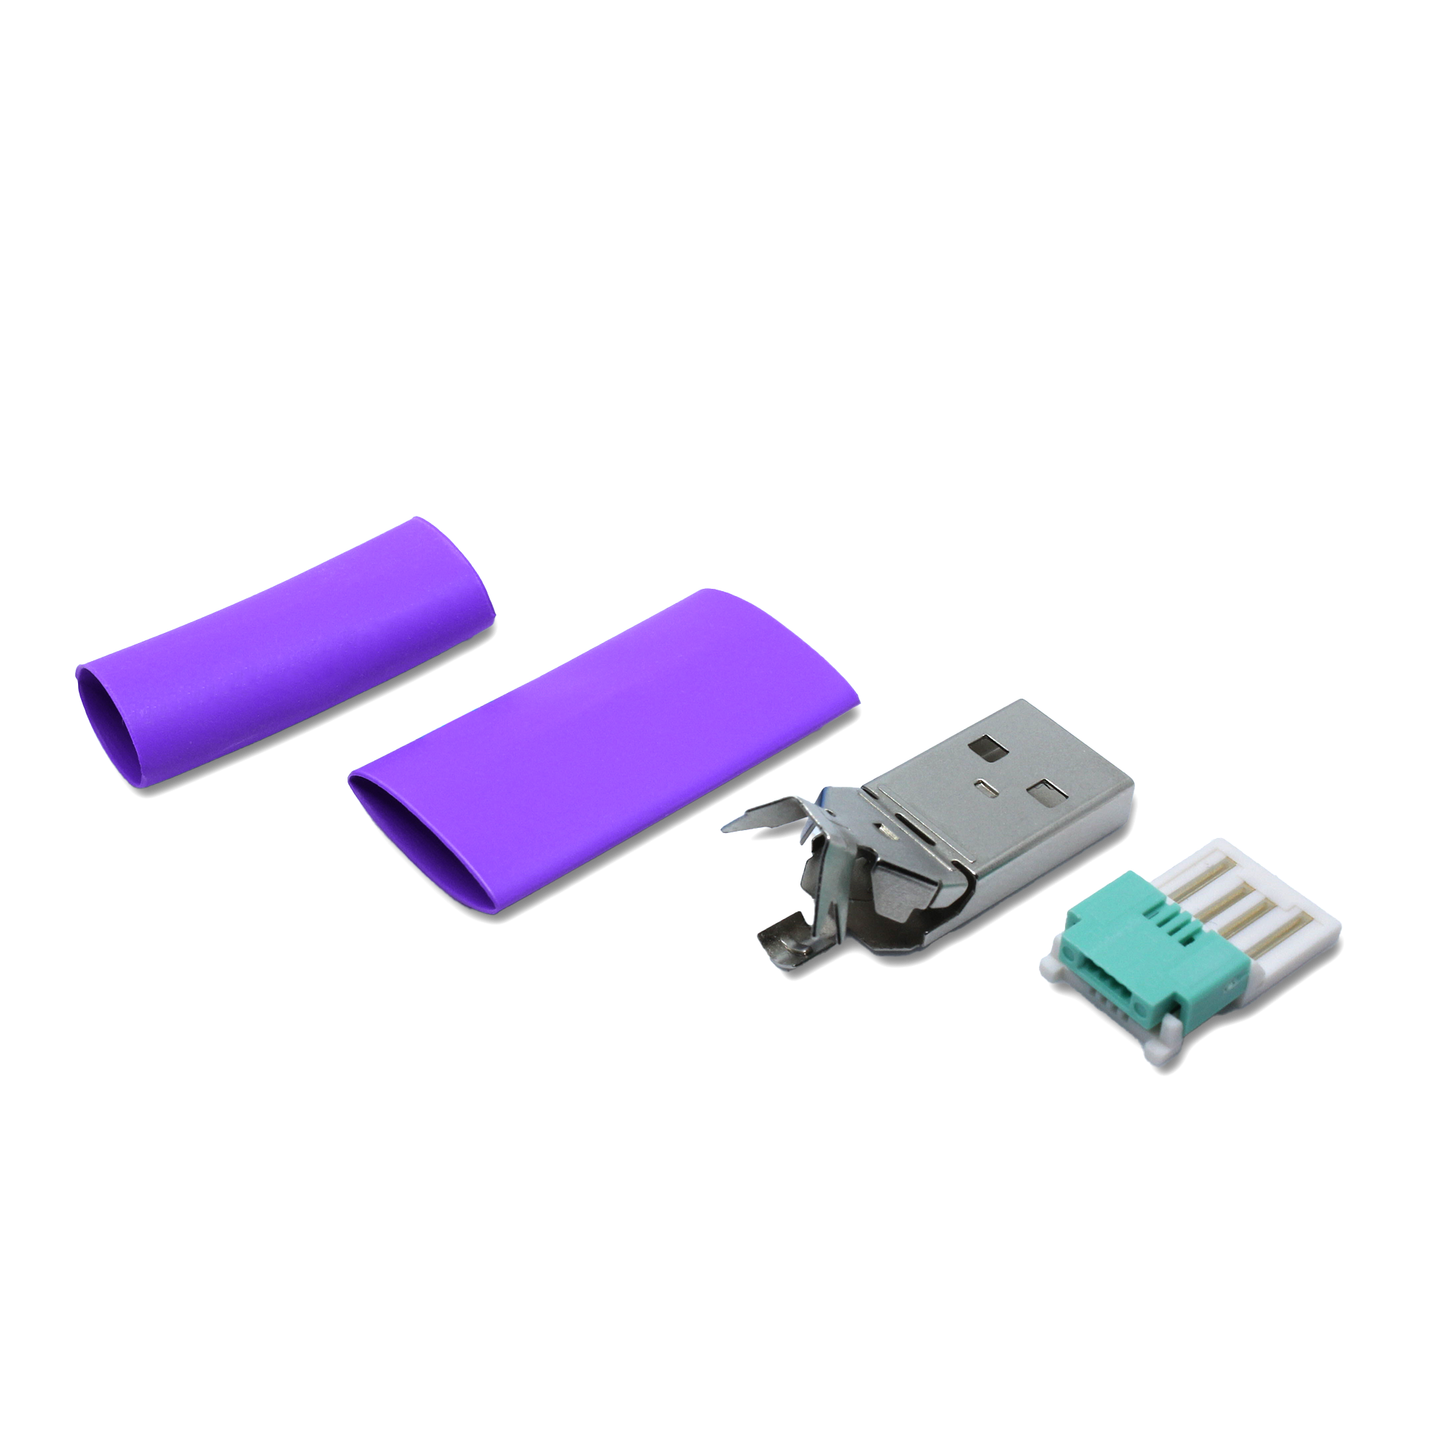 Single parts USB A plug in purple with additional thin heat shrink tube for repair (solderless/crimp) thin USB 2.0 cables